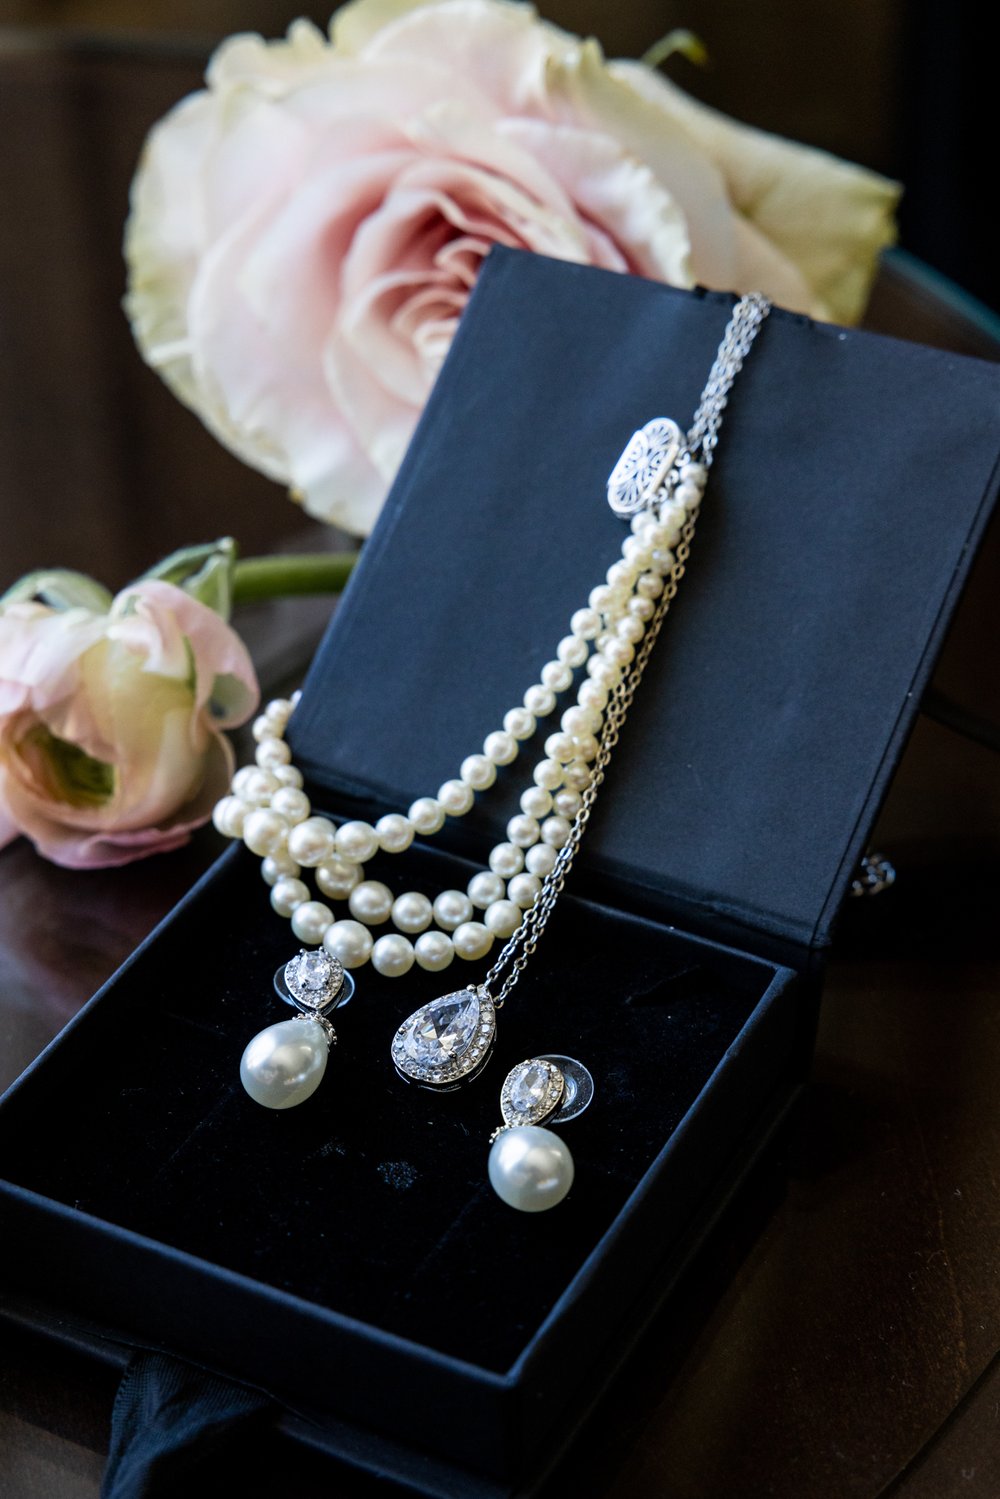 Alex Maldonado Photography | Chicago Wedding Photographer | -details of jewlery ear rings and necklace with flowers.jpg